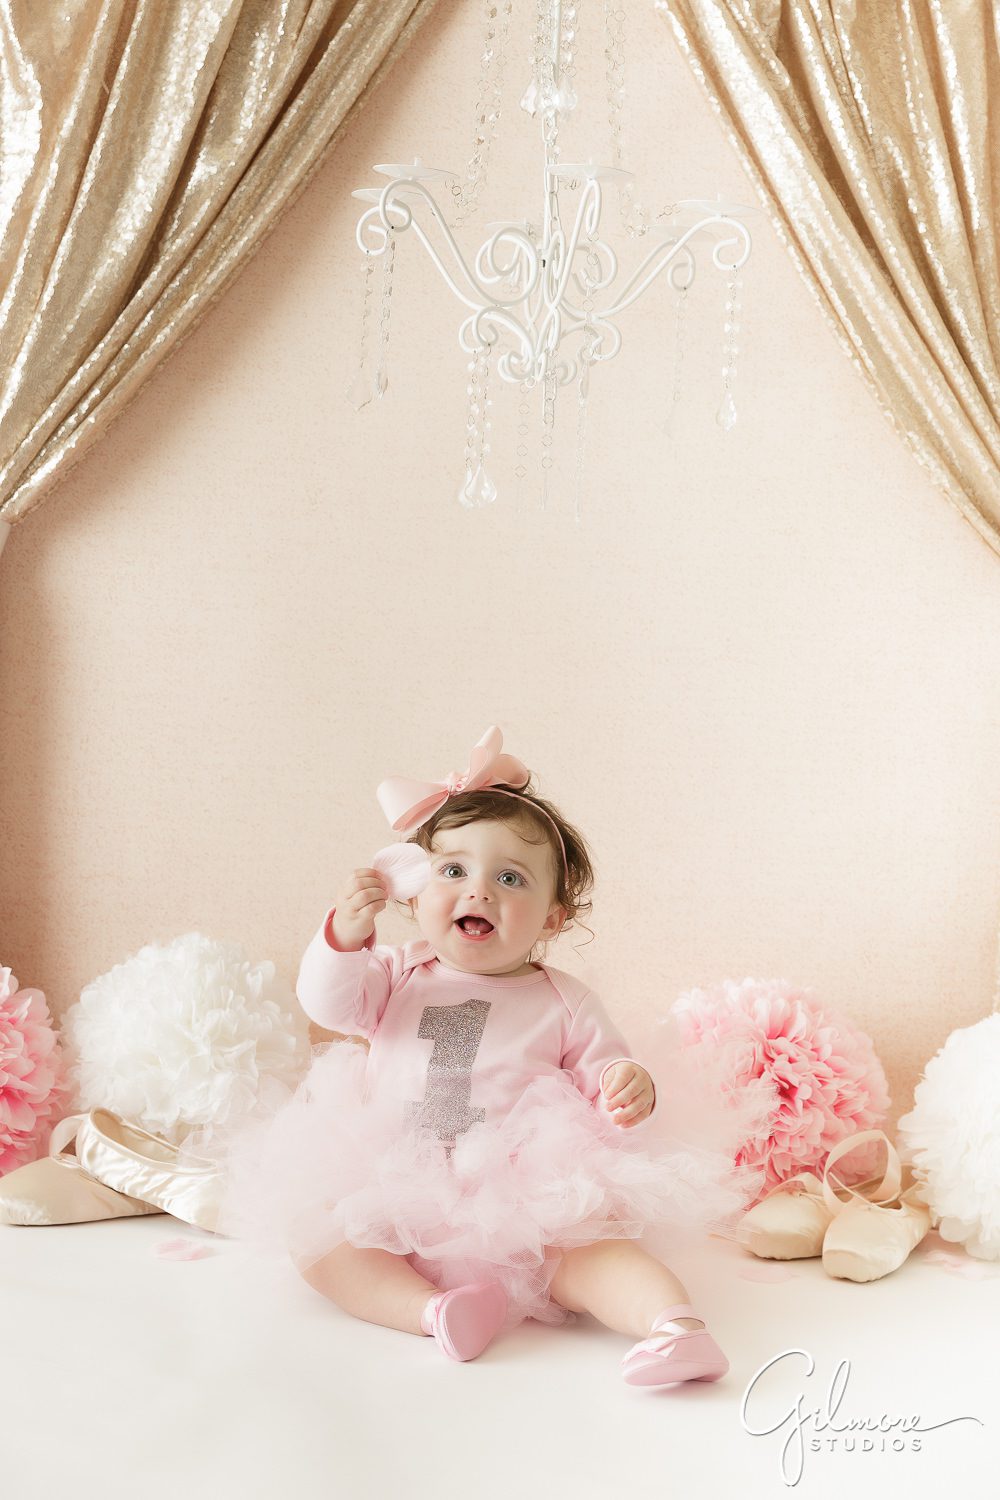 Ballerina Cake Smash Session, one year old baby girl, portrait shoot, props, drapes, tutu, outfit, pink, white, skirt, headband, bow, background